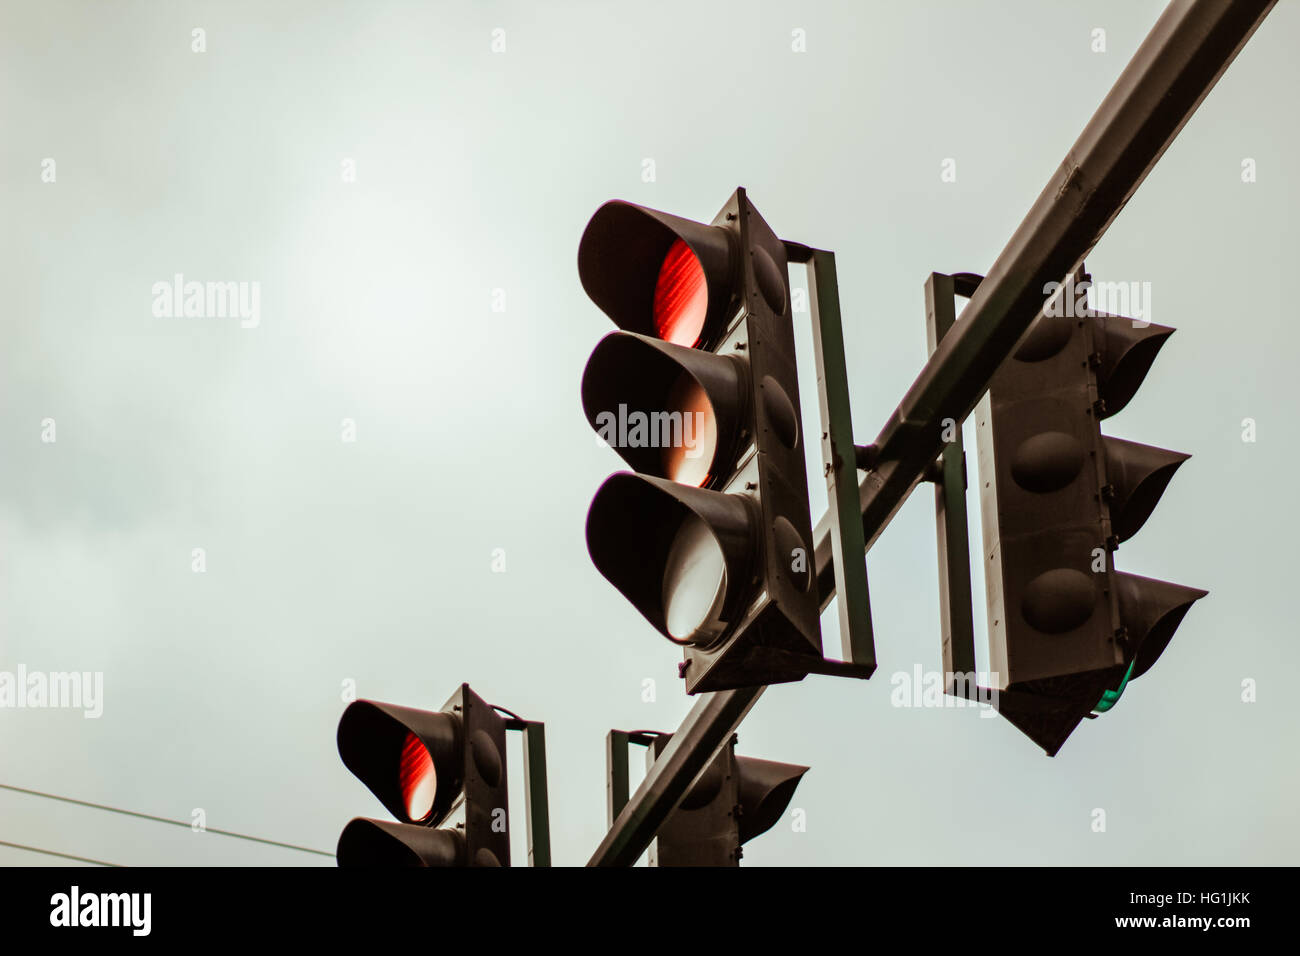 Photograph of some Traffic lights and cloudy sky Stock Photo